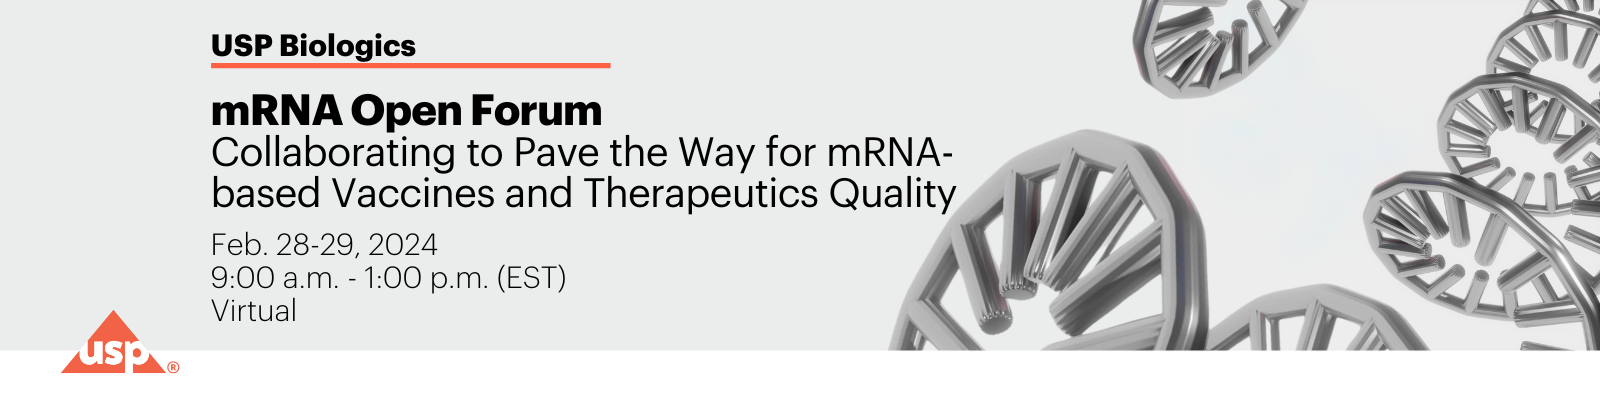 Collaborating to pave the way for mRNA-based vaccines and therapeutics quality